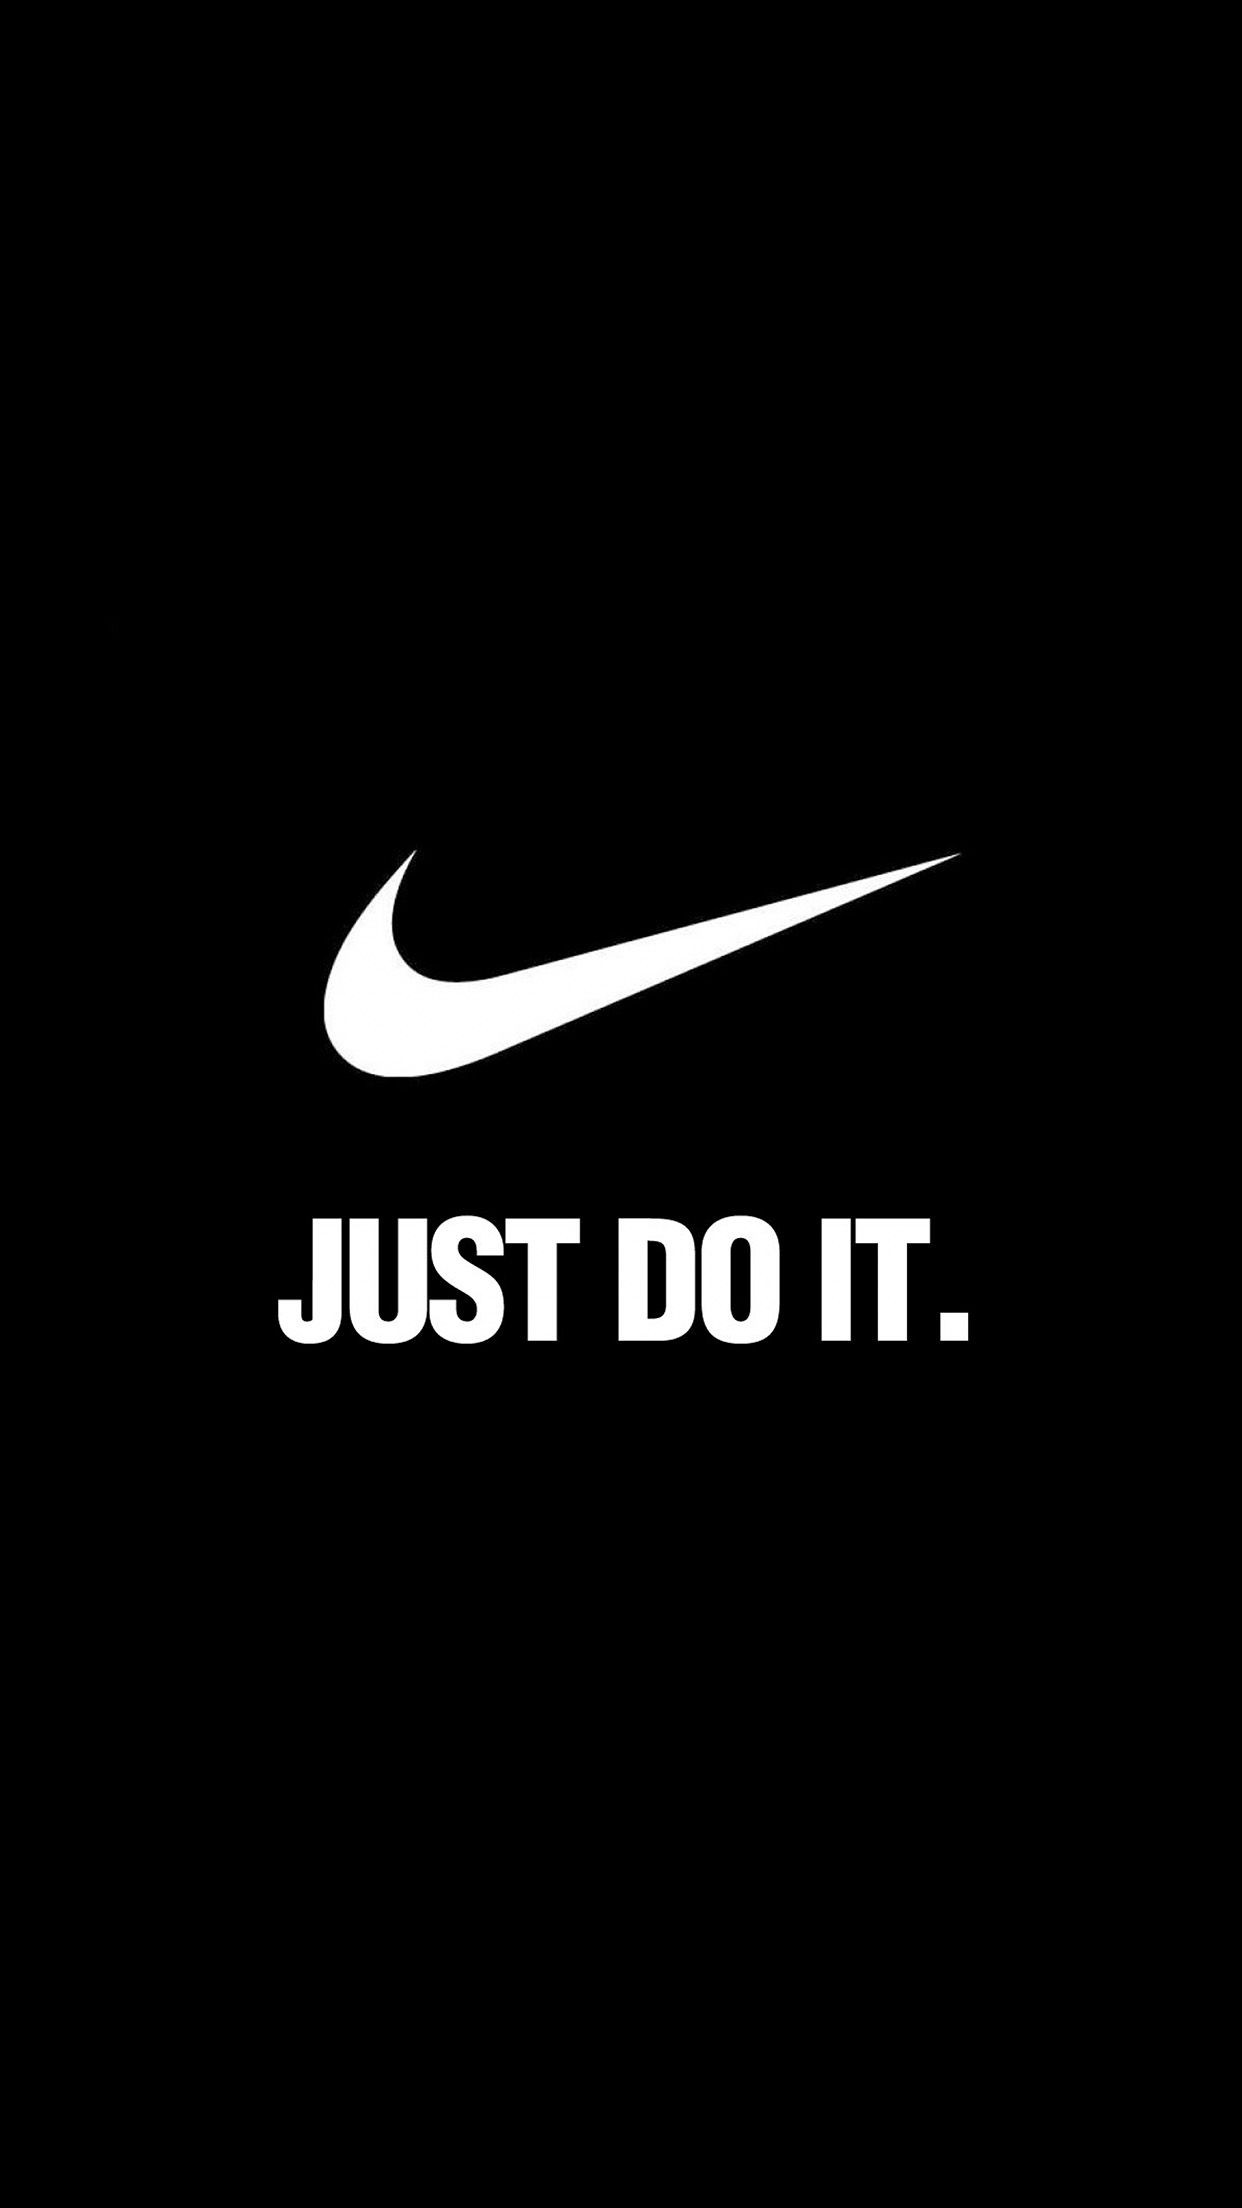 1242x2208 Title : nike wallpaper iphone – 2018 iphone wallpapers | Ãcran, fond ecran.  Dimension : 1242 x 2208. File Type : JPG/JPEG